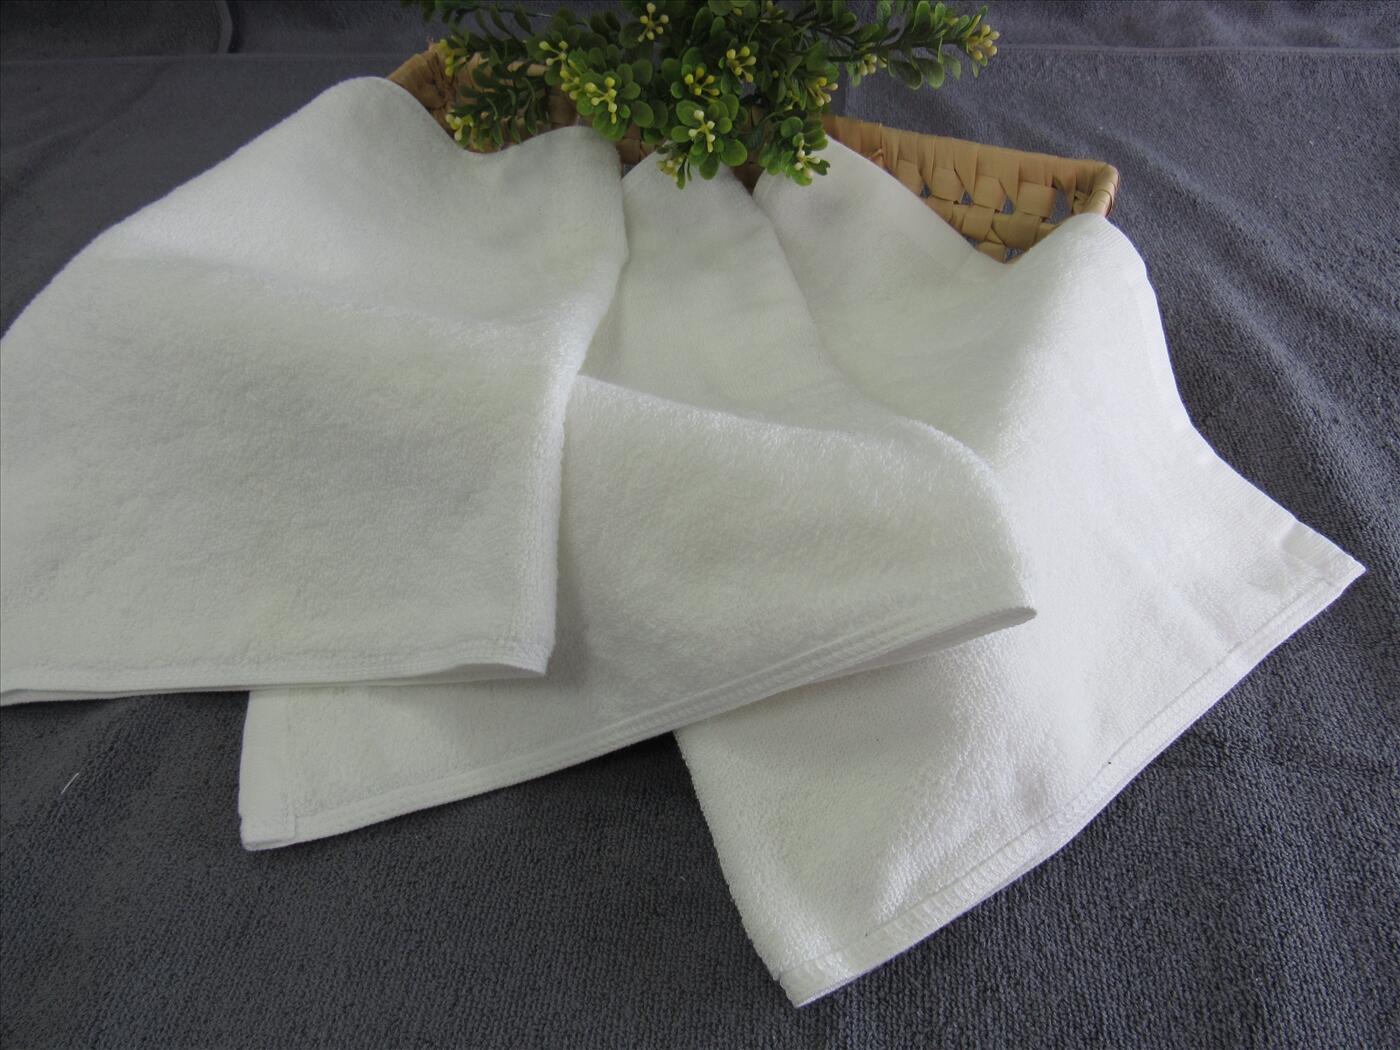 Hotel Face Towel – Standard 40x70 160g White